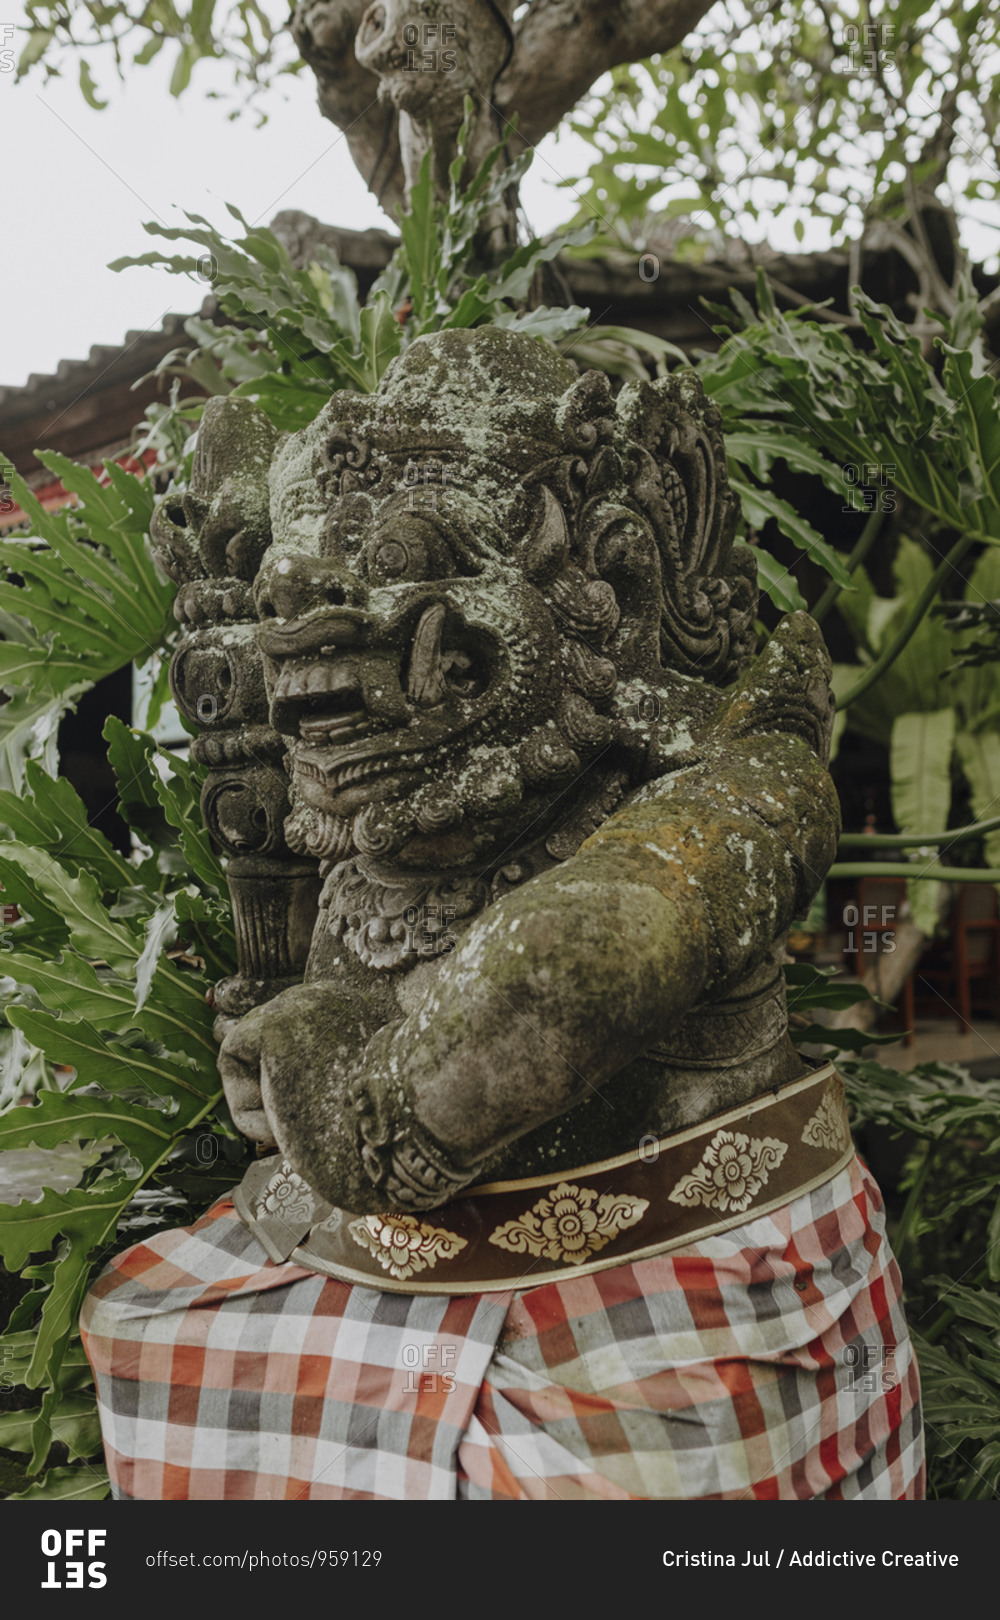 Low angle of statue of Demon surrounded by green tropical foliage in Bali